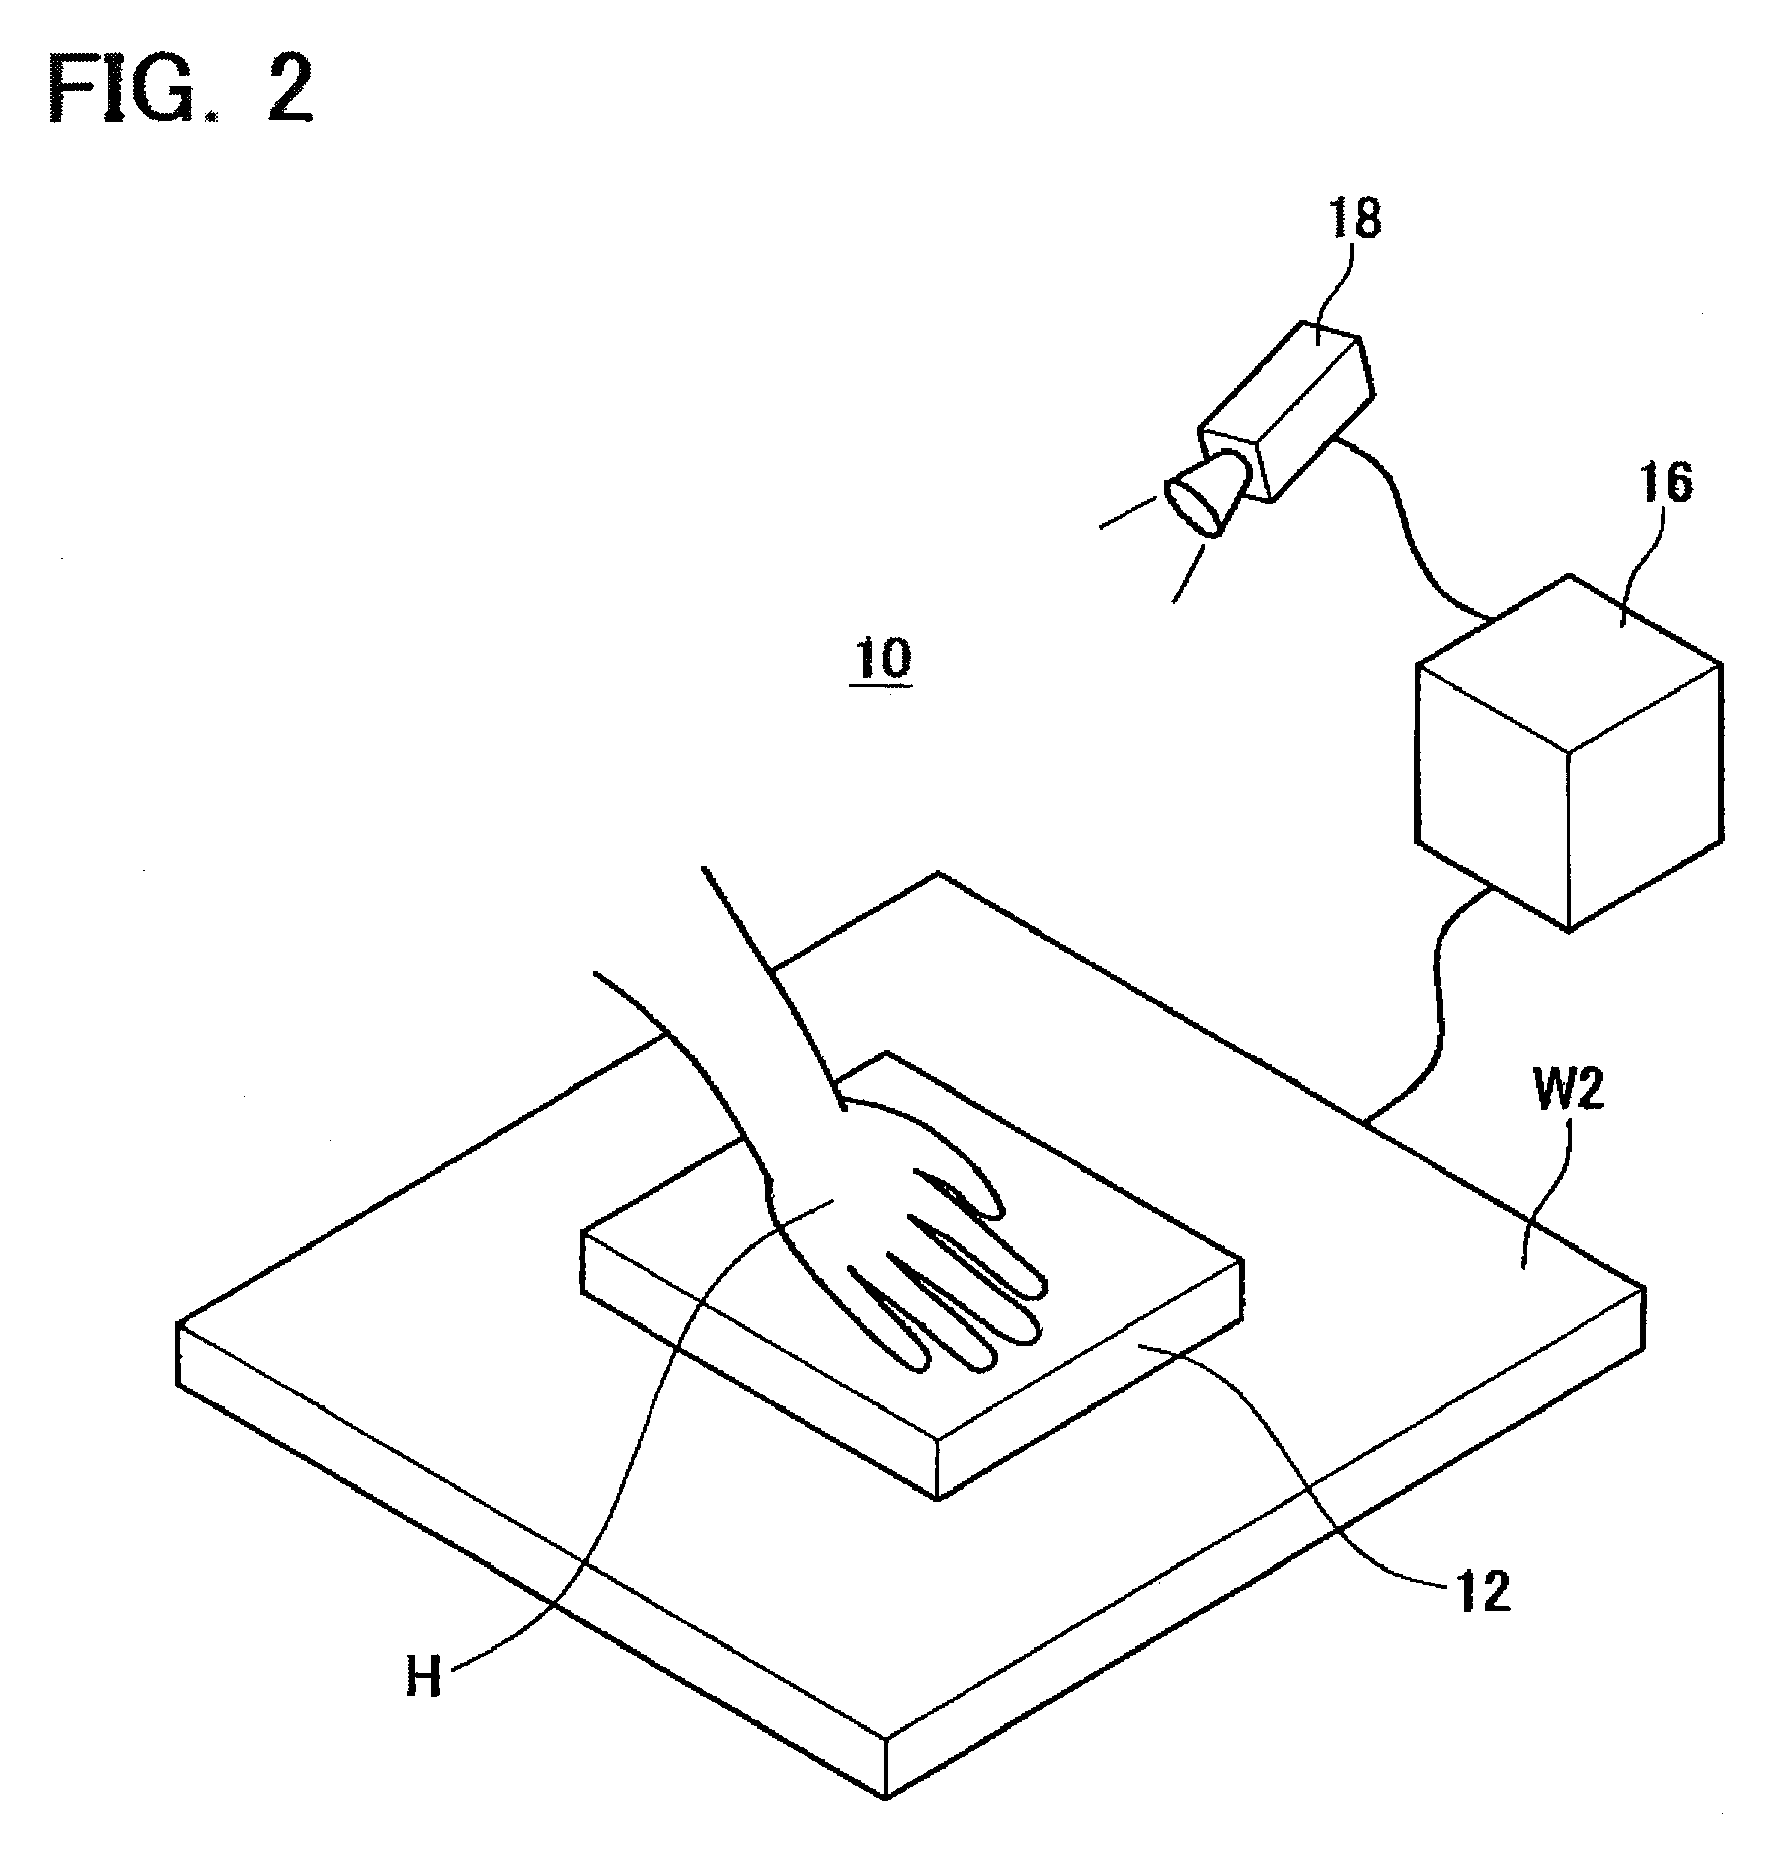 Tactile display and CAD system